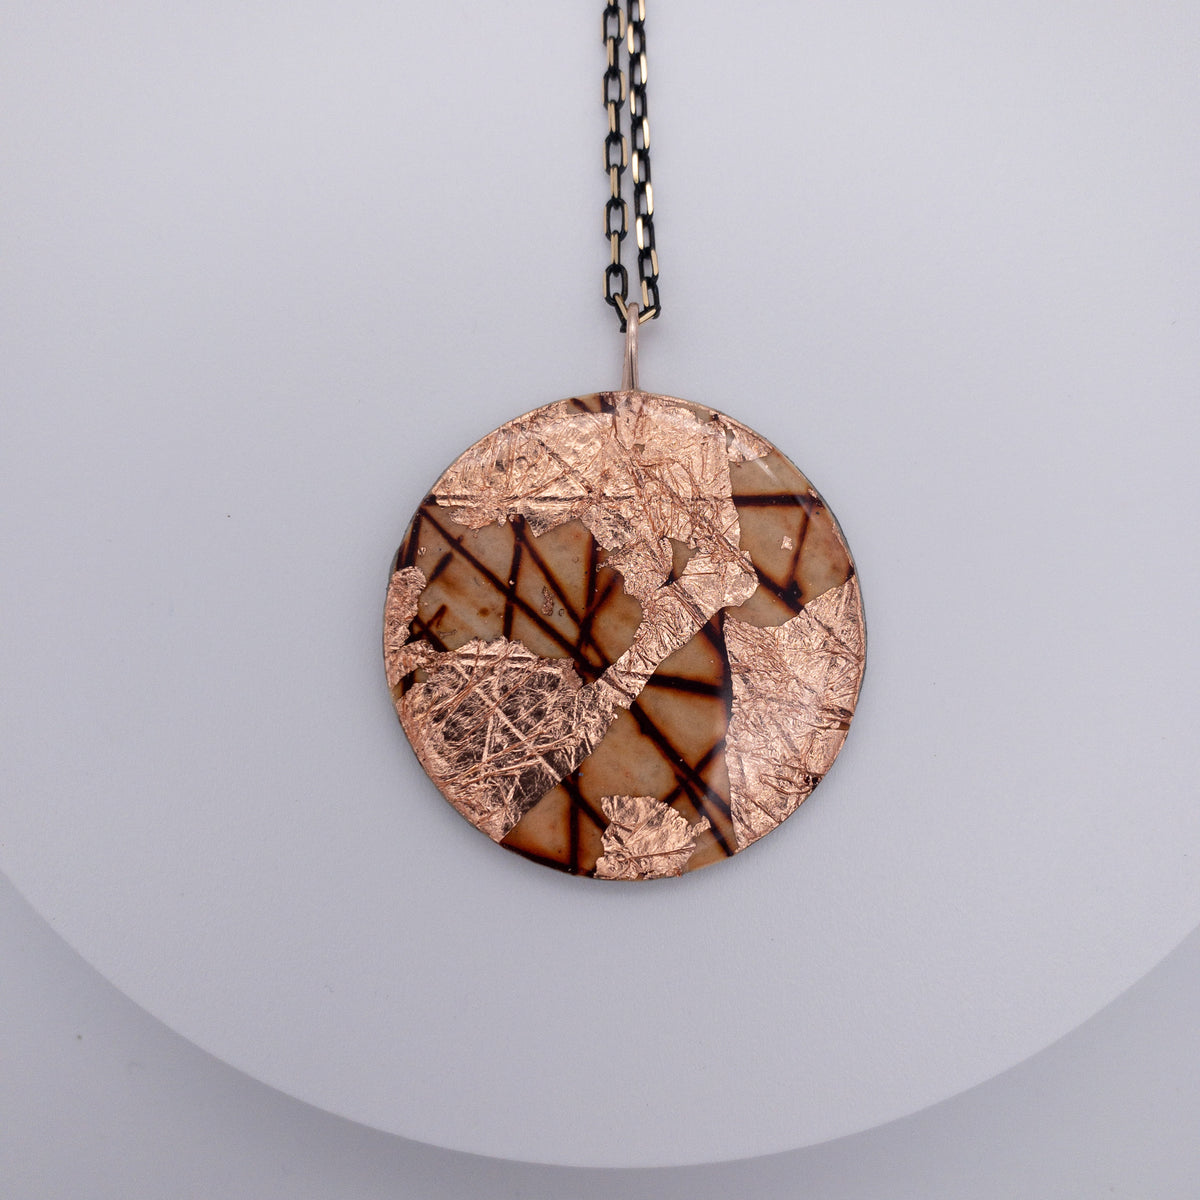 Ró sgraffito textile necklace in rose-gold/rust